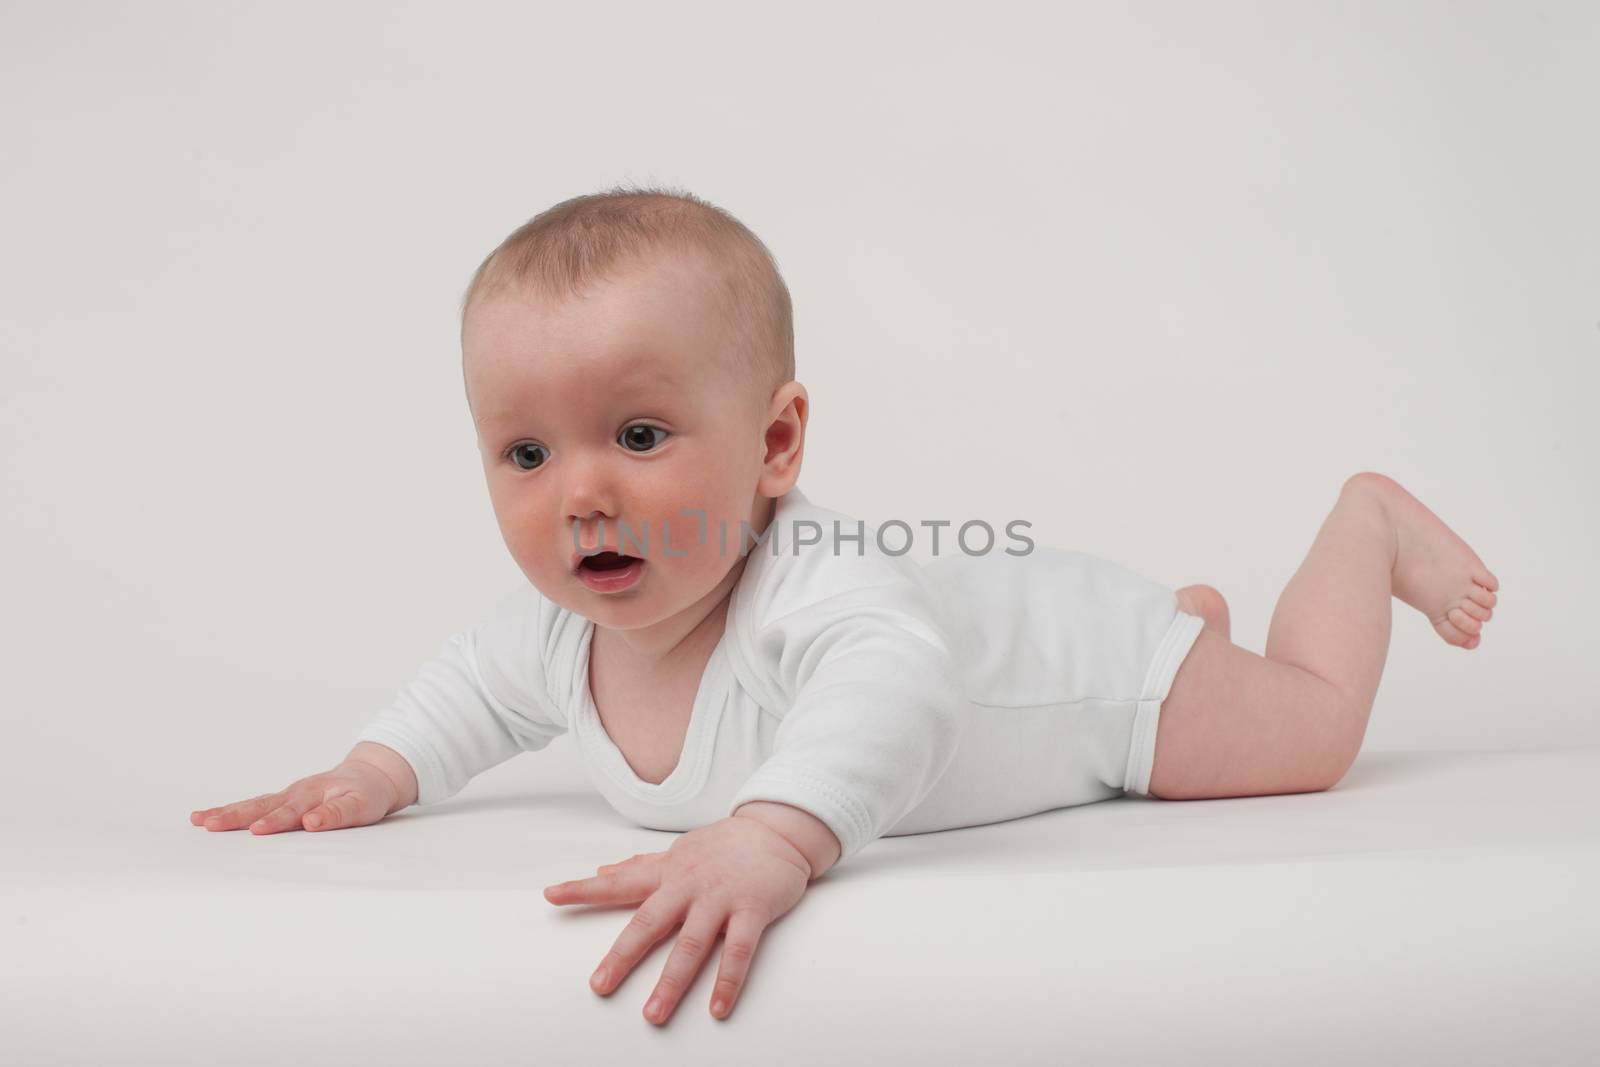 baby on a white background in a white pajamas